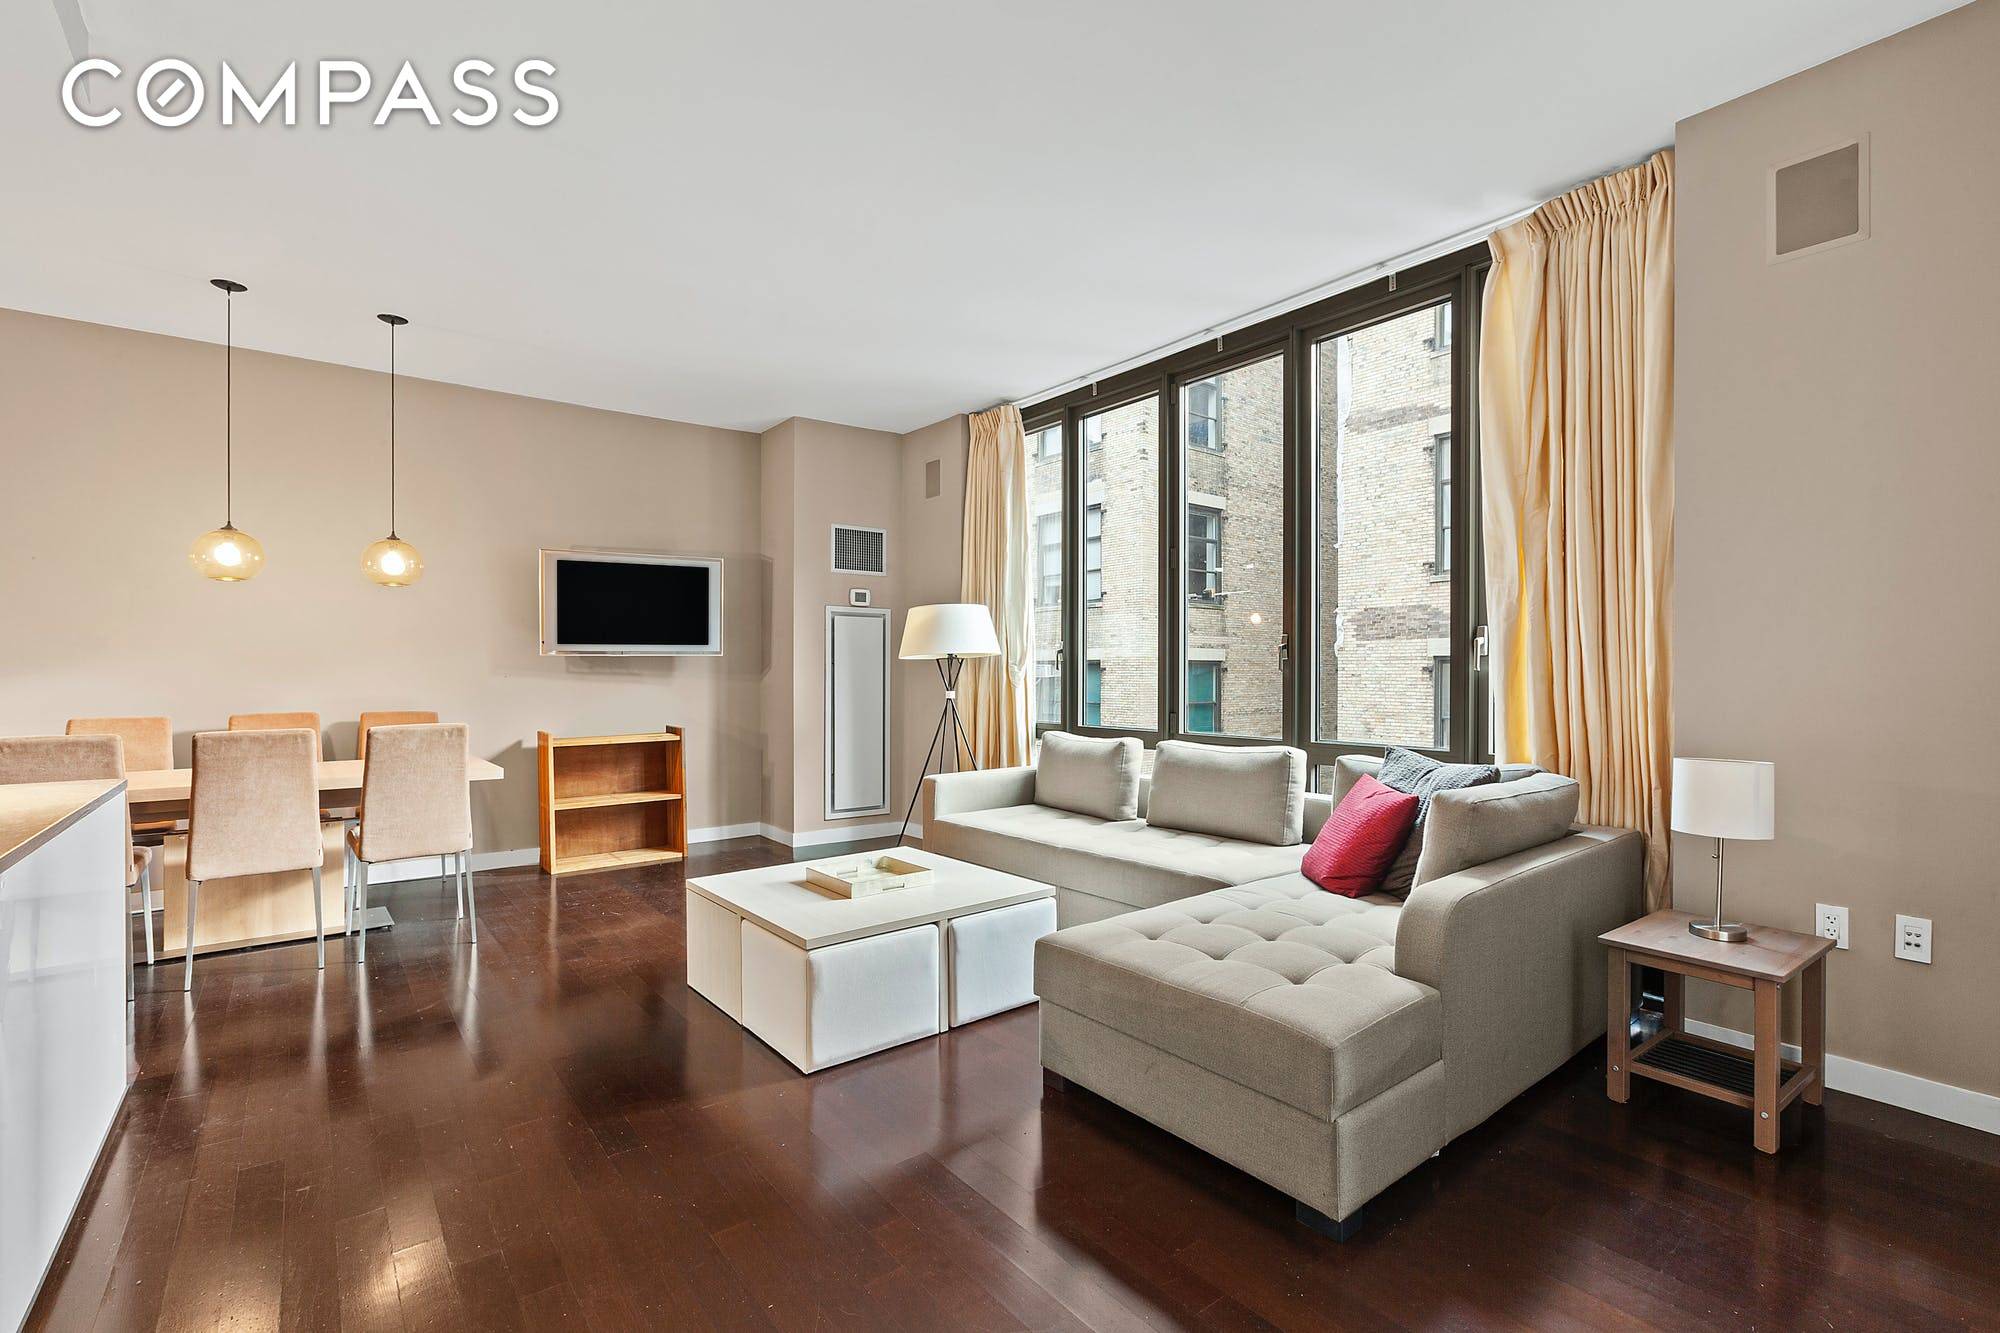 Located in the heart of the Flatiron district, this modern, loft like 1, 225 sq ft, 2 bedroom, 2 bath home features 9.